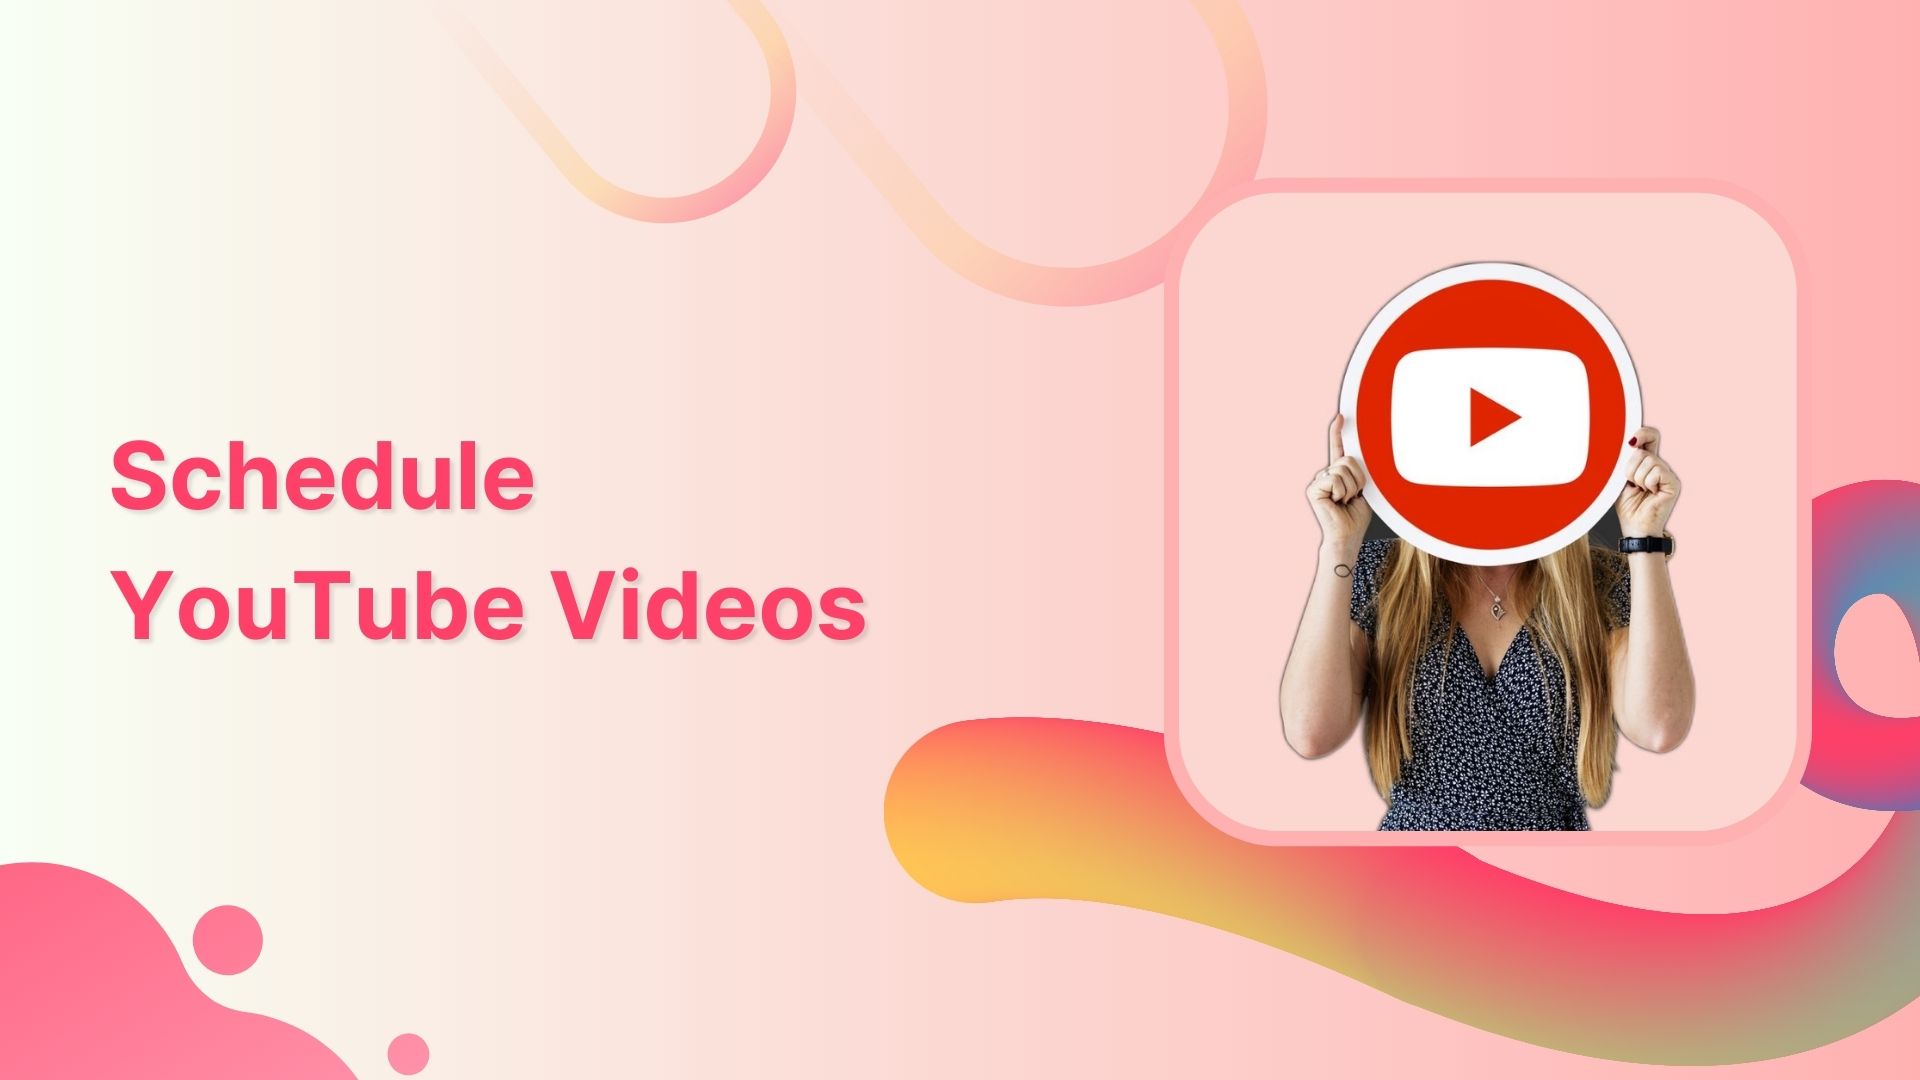 How to Schedule YouTube Videos in 2023?